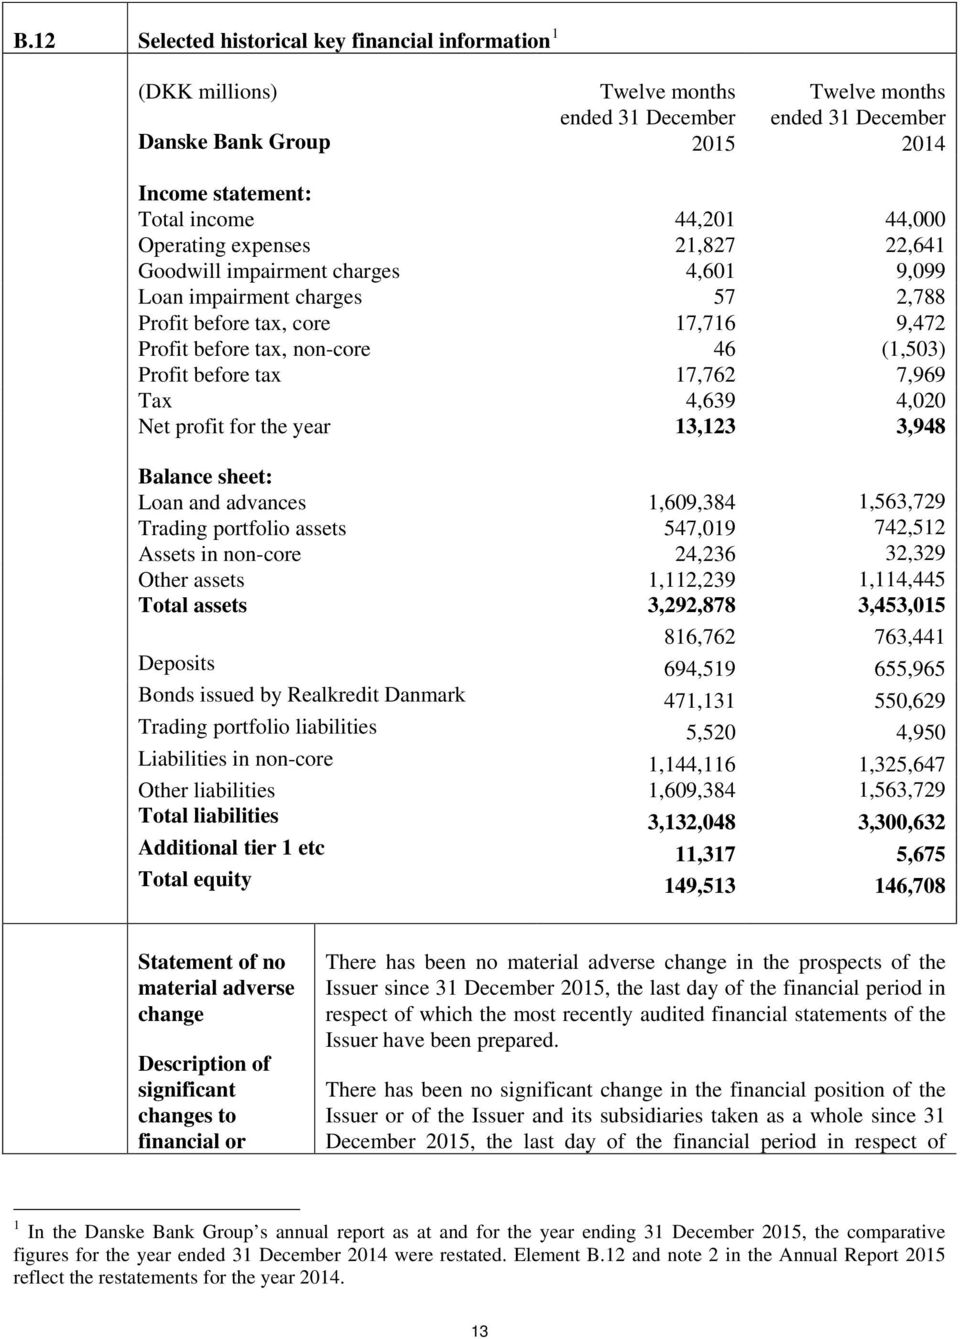 before tax 17,762 7,969 Tax 4,639 4,020 Net profit for the year 13,123 3,948 Balance sheet: Loan and advances 1,609,384 1,563,729 Trading portfolio assets 547,019 742,512 Assets in non-core 24,236